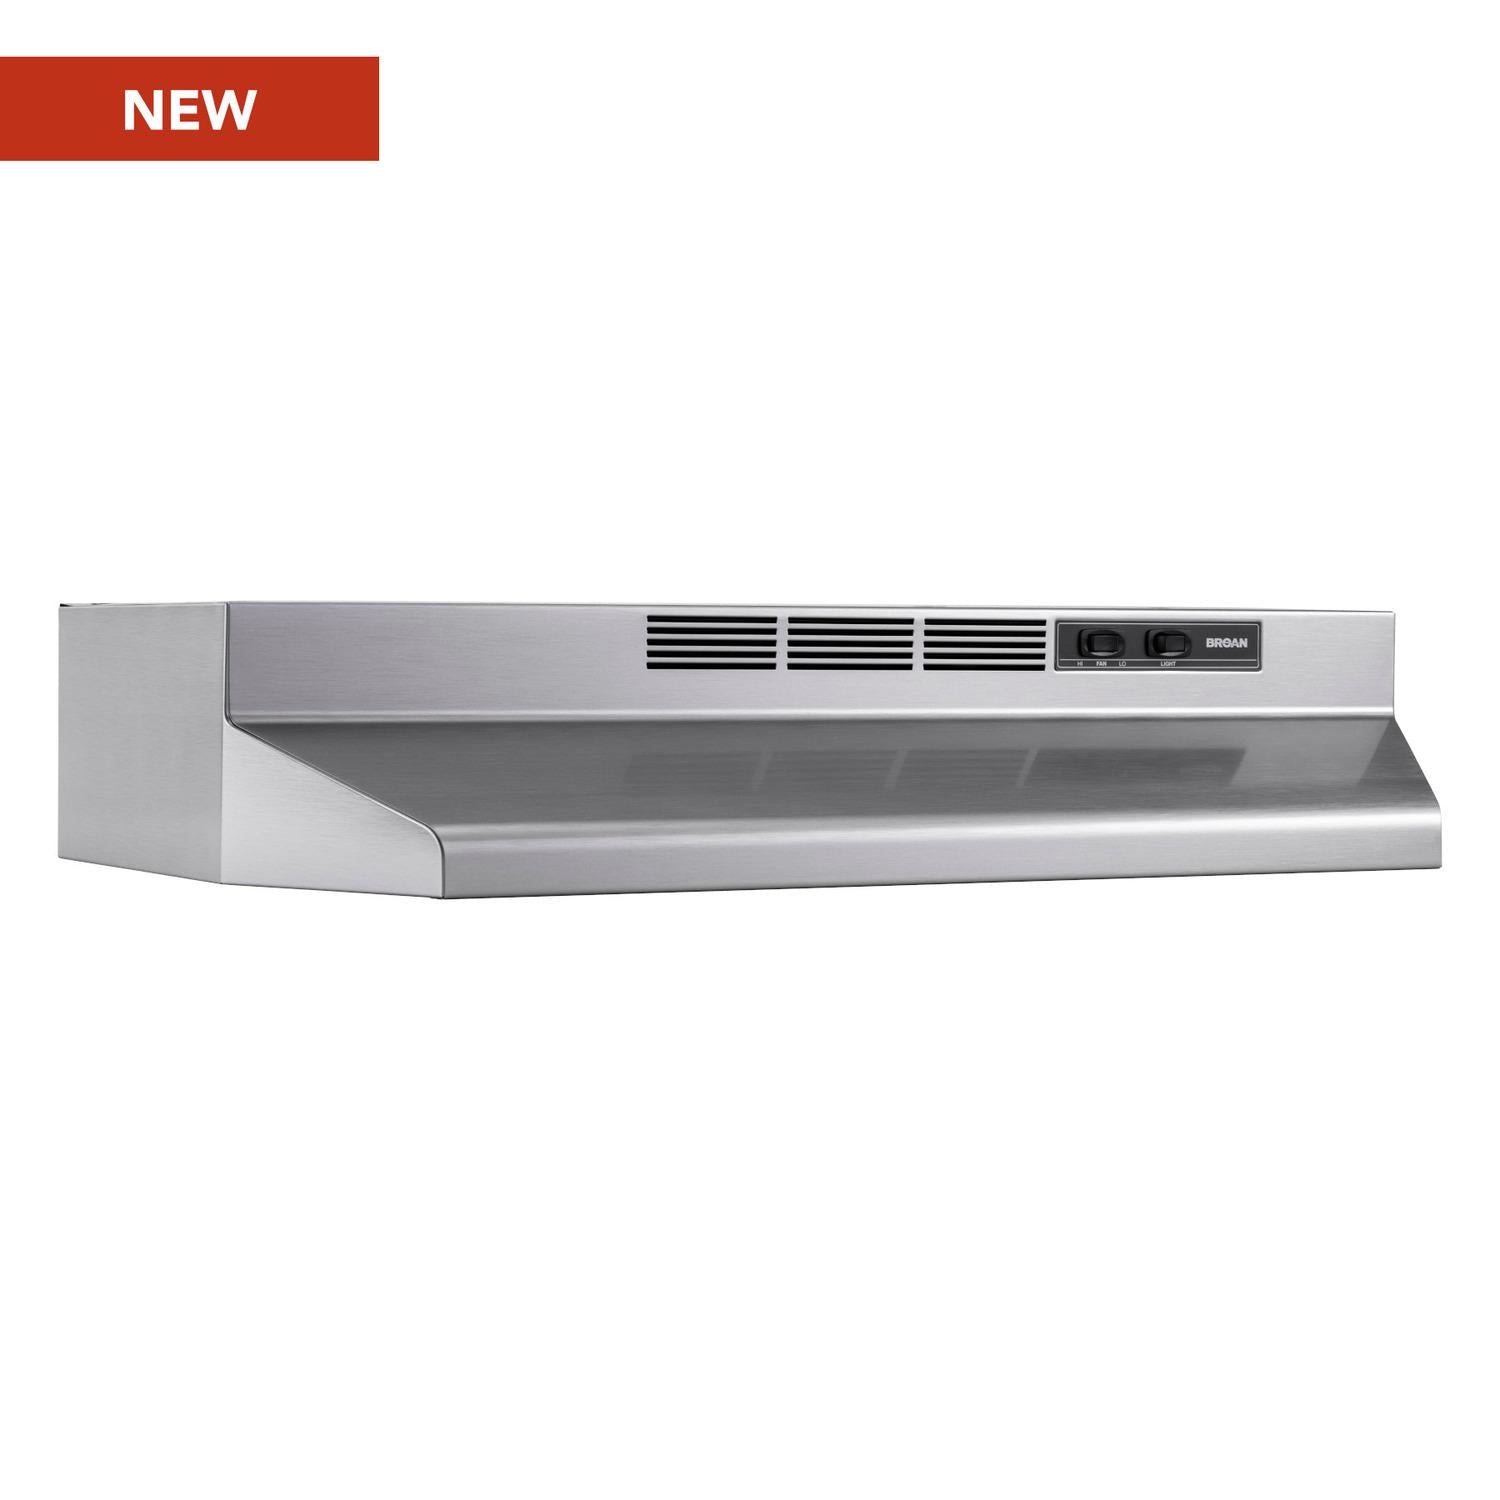 Broan 4130SF Broan® 30-Inch Ductless Under-Cabinet Range Hood, Stainless Finish With Printguard™